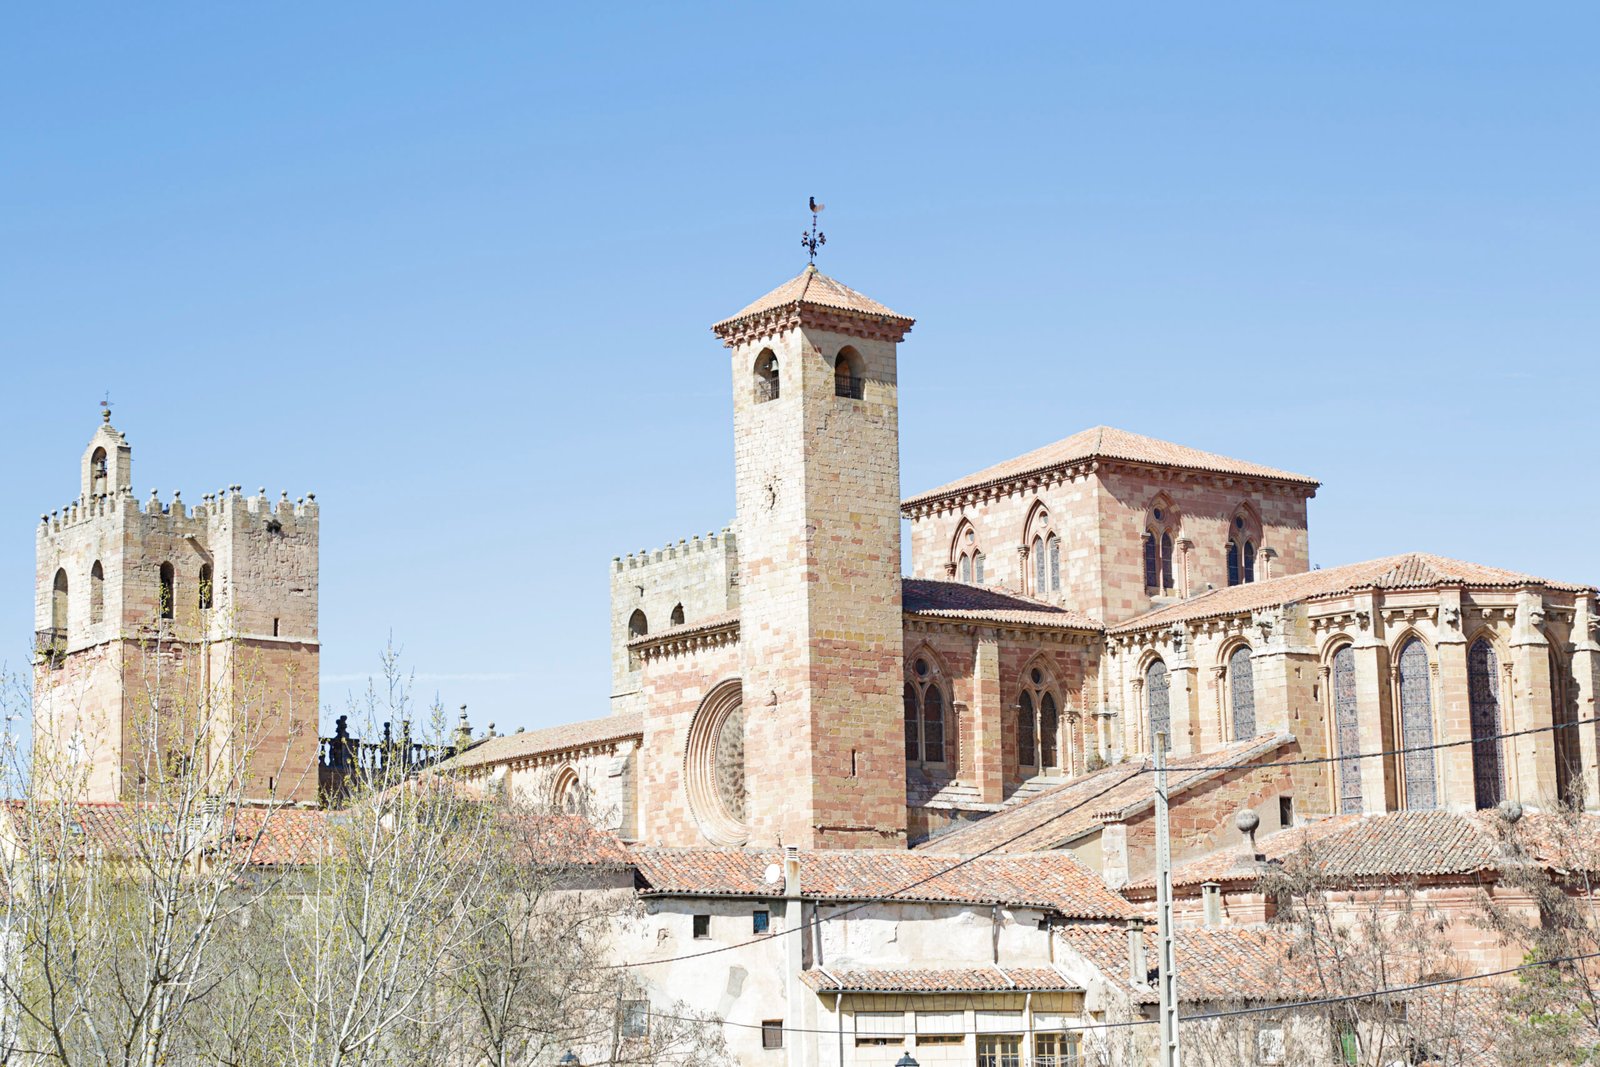 Sigüenza Cathedral located in the town of Sigüenza, in Castile La Mancha, Spain